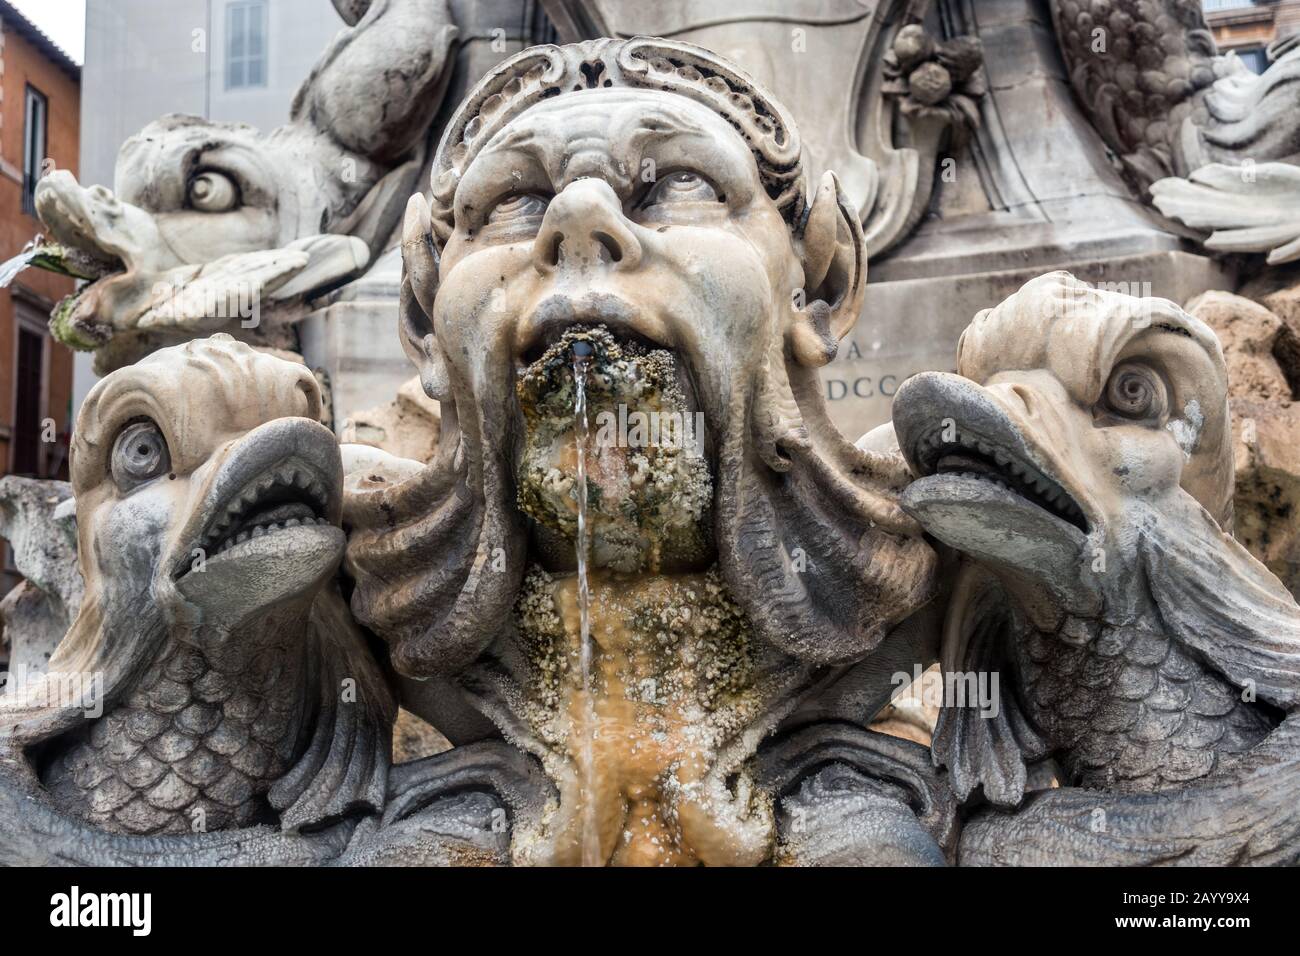 Face and waterspout at Fontana del Pantheon  a fountain which stands near the Pantheon in the Piazza della Rotonda Rome Italy. Stock Photo